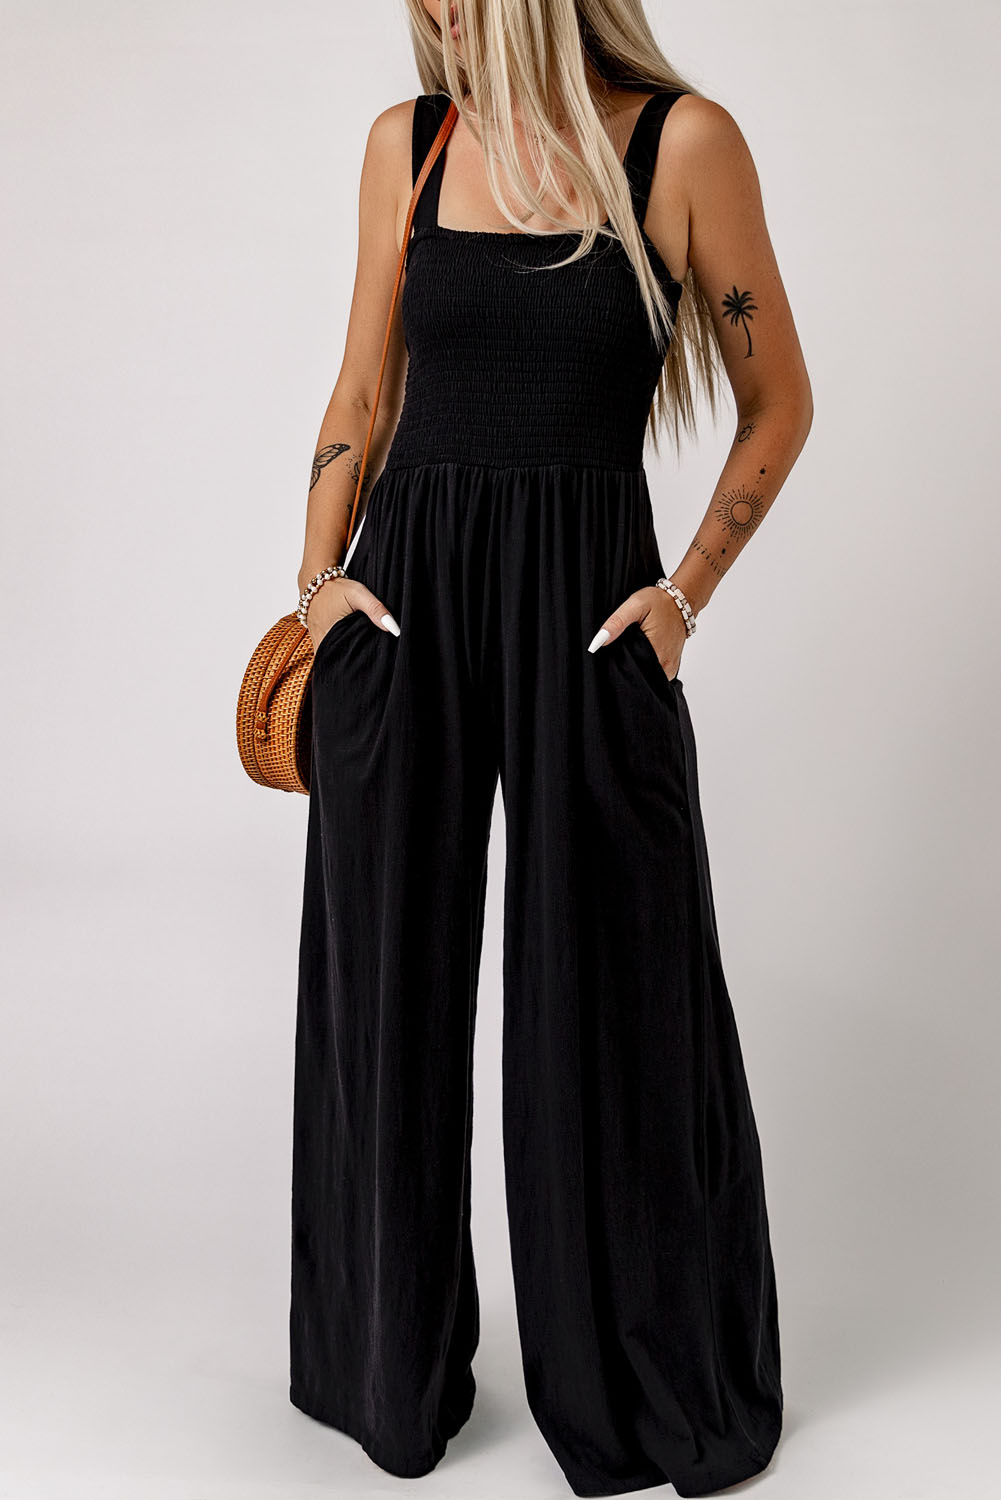 Black Casual Smocked Sleeveless Wide Leg Jumpsuit With Pockets | Shewin ...